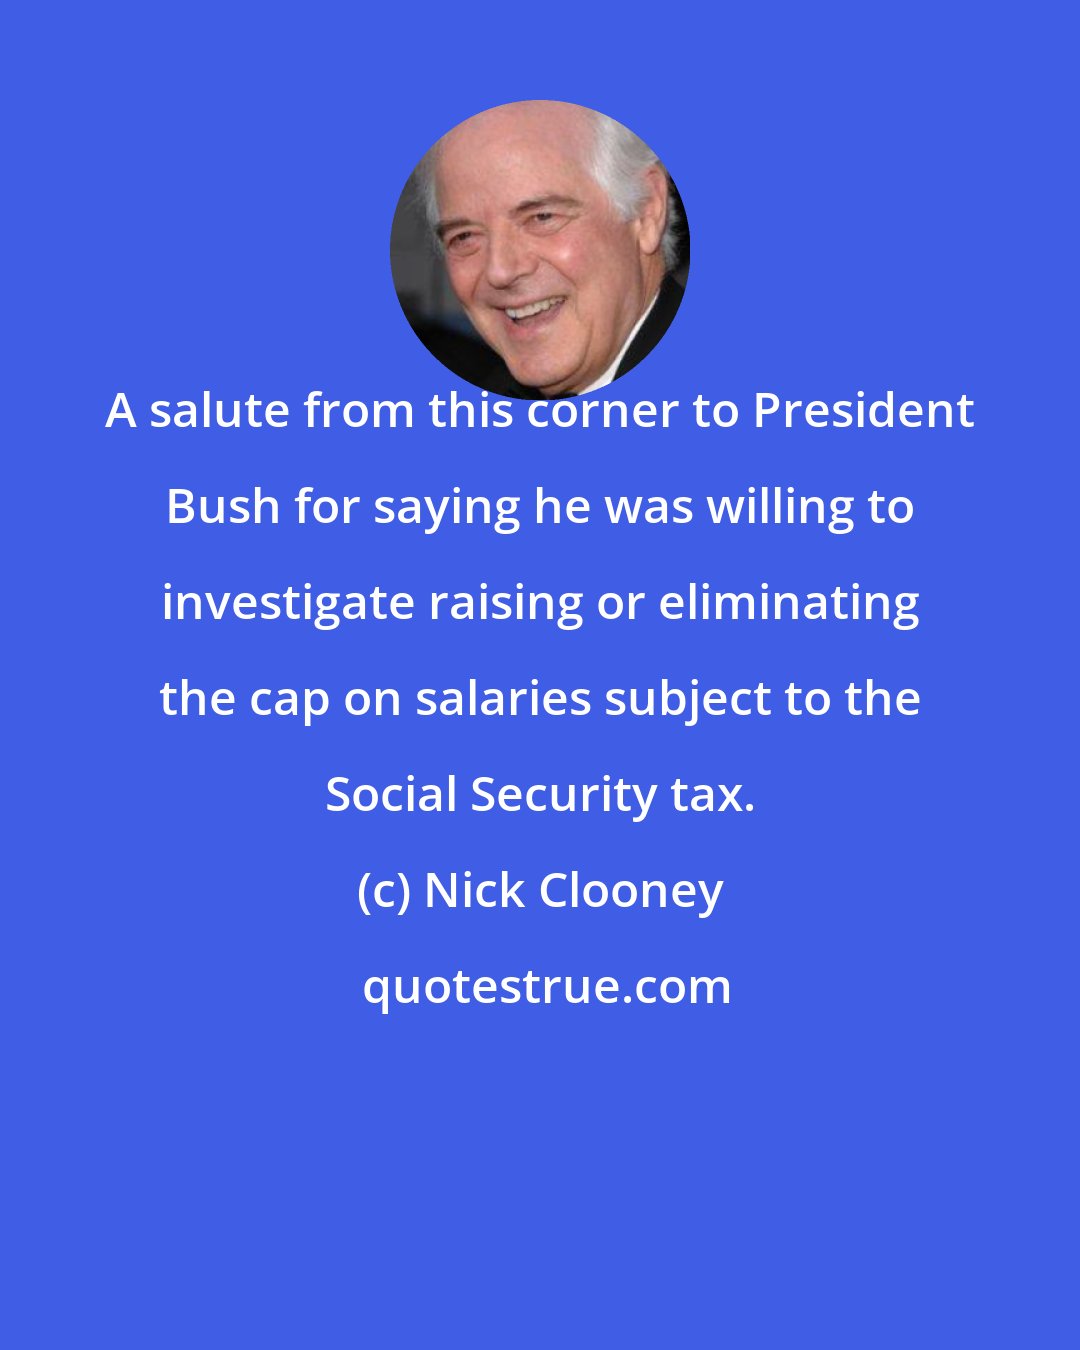 Nick Clooney: A salute from this corner to President Bush for saying he was willing to investigate raising or eliminating the cap on salaries subject to the Social Security tax.